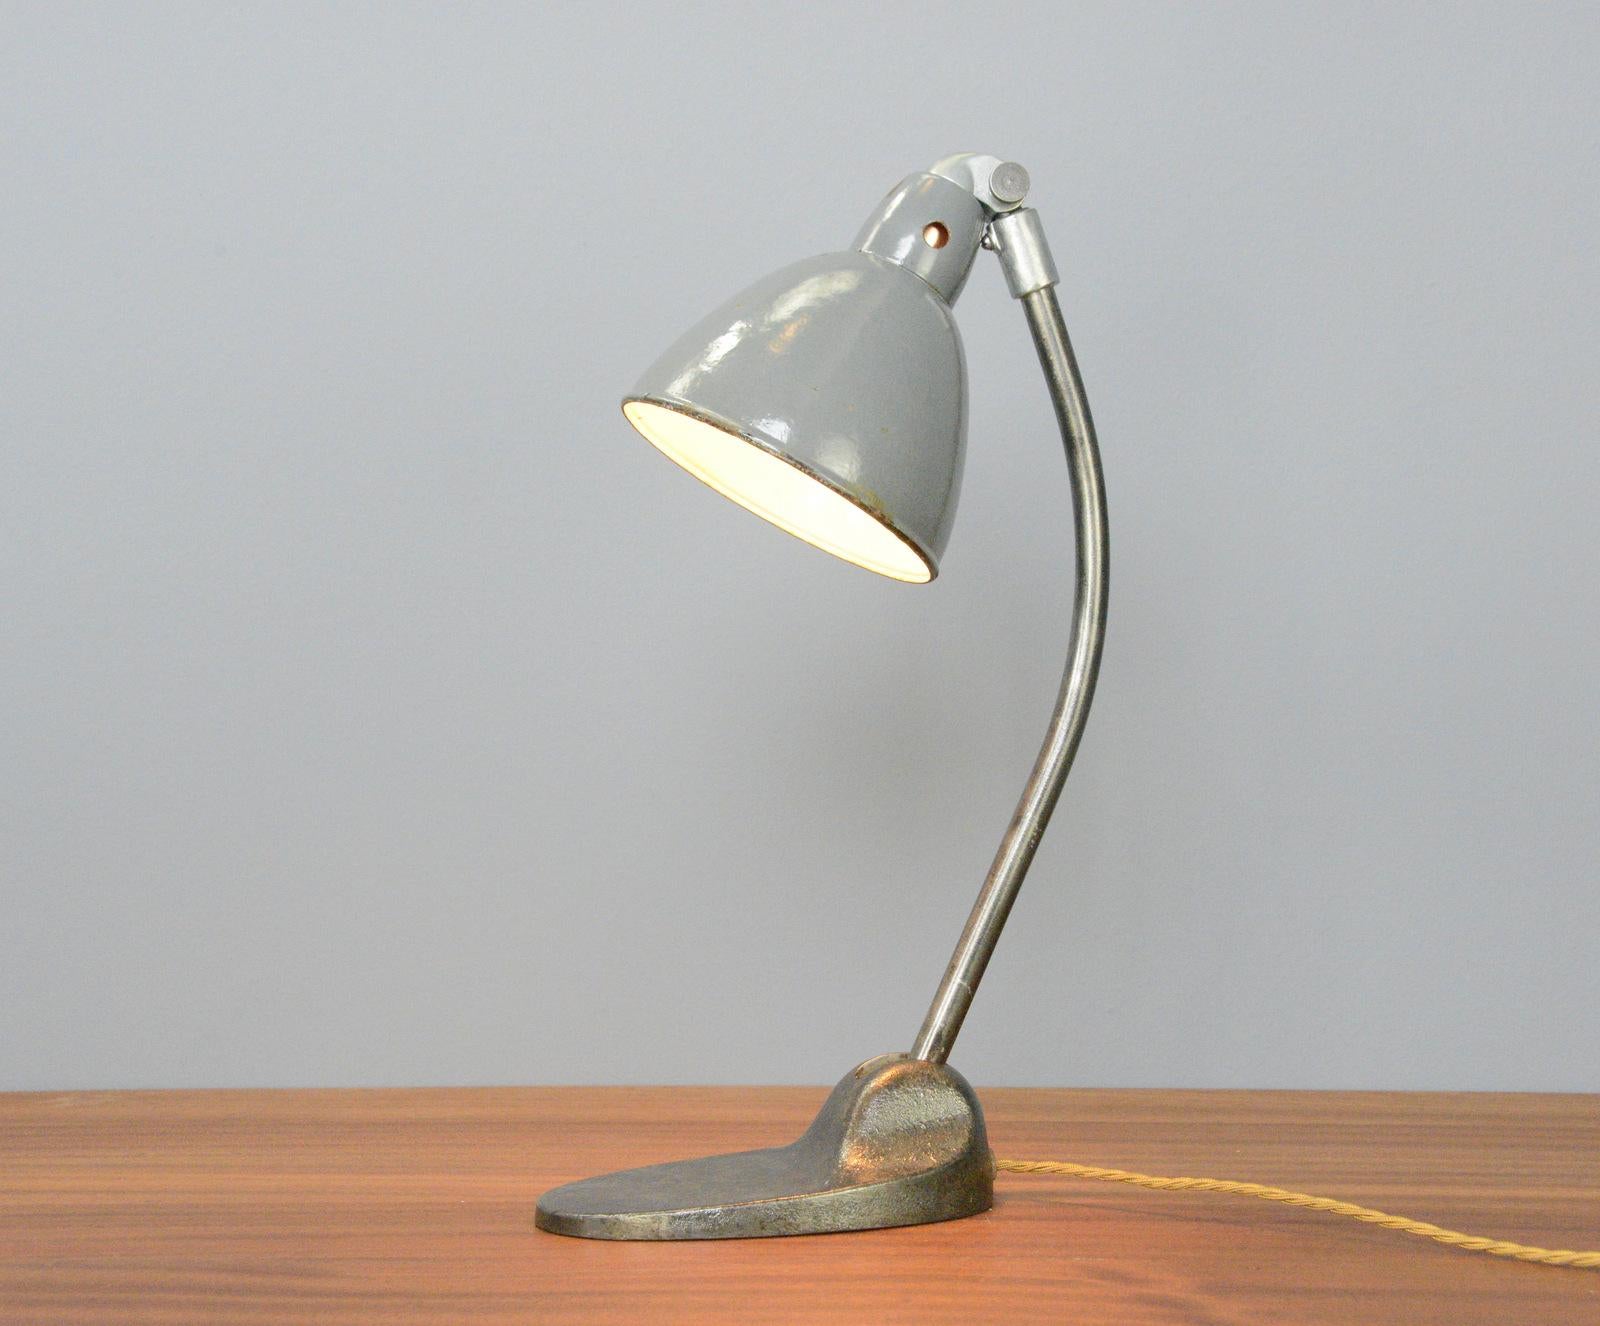 Desk lamps by Siemens Circa 1930s

- Cast iron base
- Adjustable steel arm and shade
- Takes E27 fitting bulbs
- Produced by Siemens, Berlin
- German ~ 1930s
- 45cm tall x 21cm deep x 16cm wide

Condition Report

Fully restored with